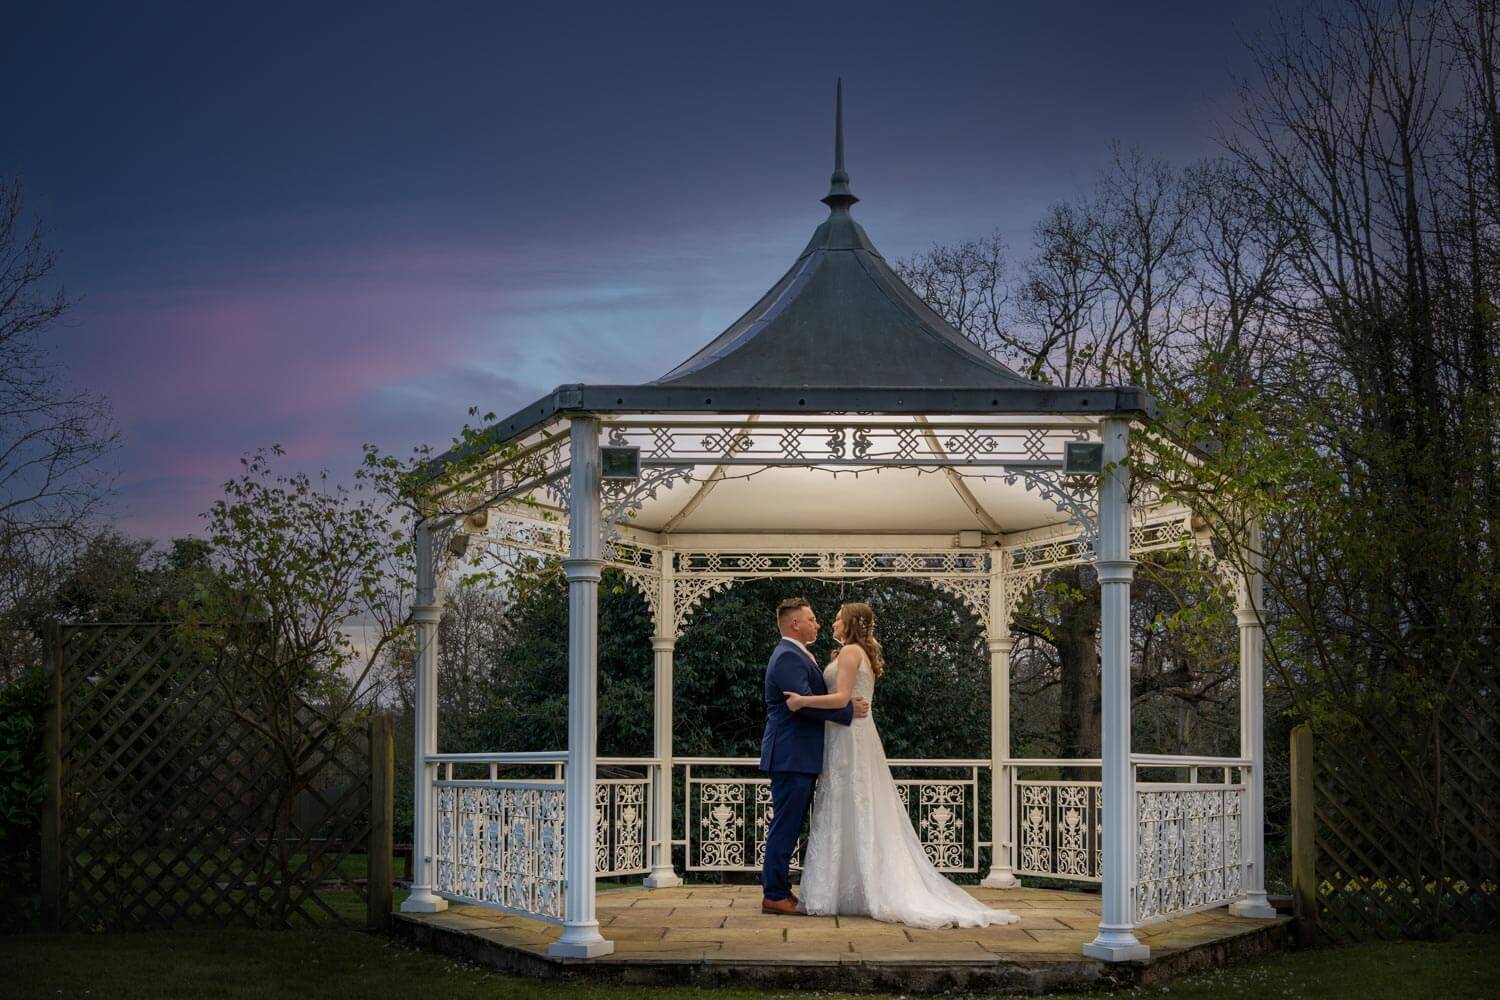 The backlit bride and groom embrace under the pergola at Farnham House Hotel during dusk